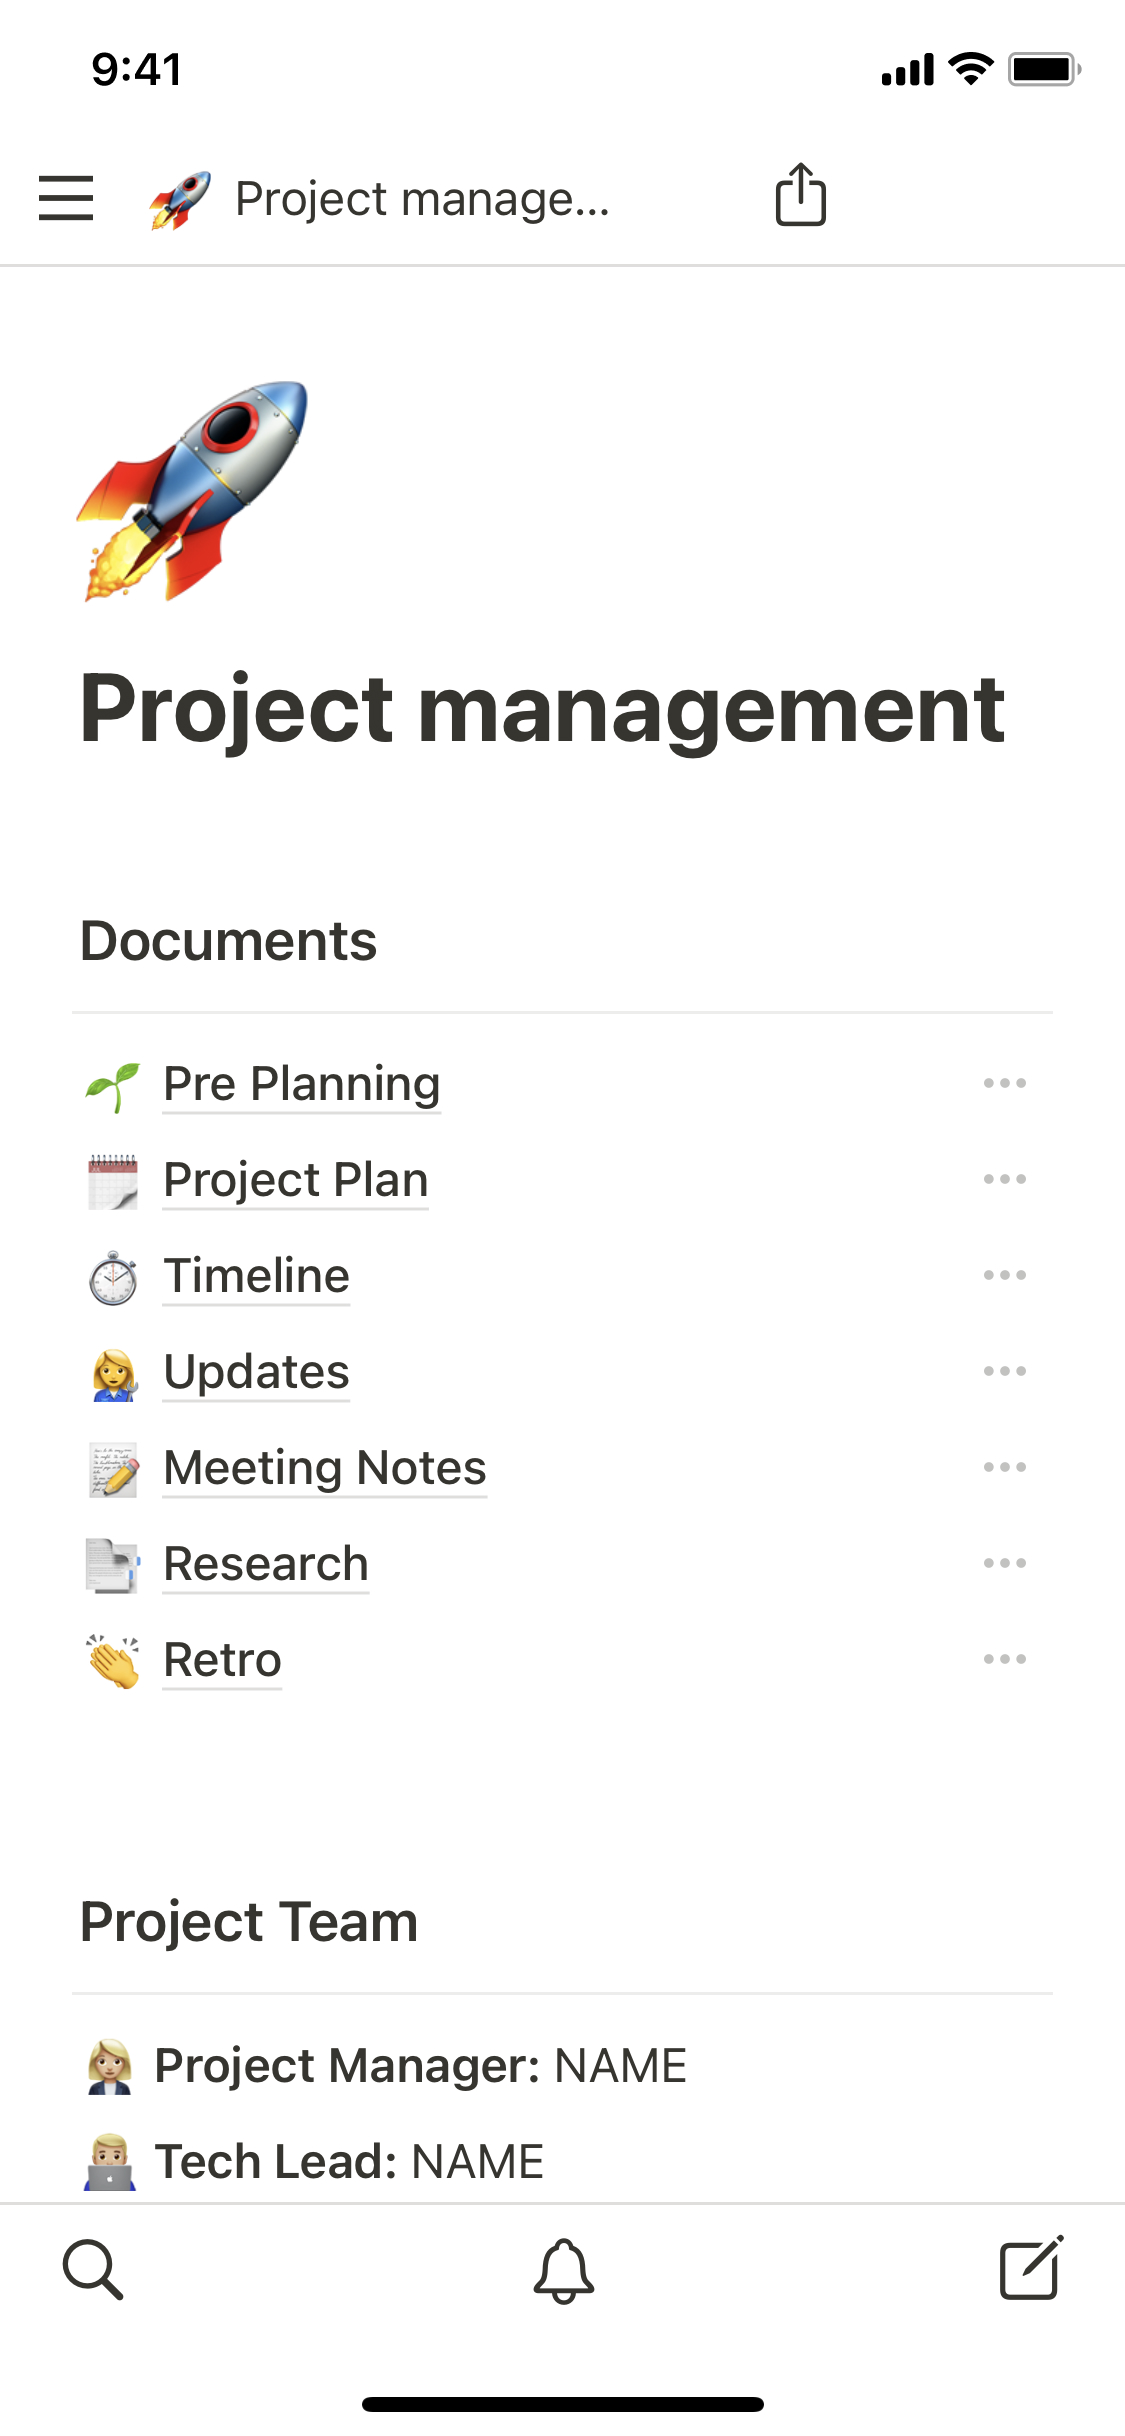 The mobile image for the Project management template